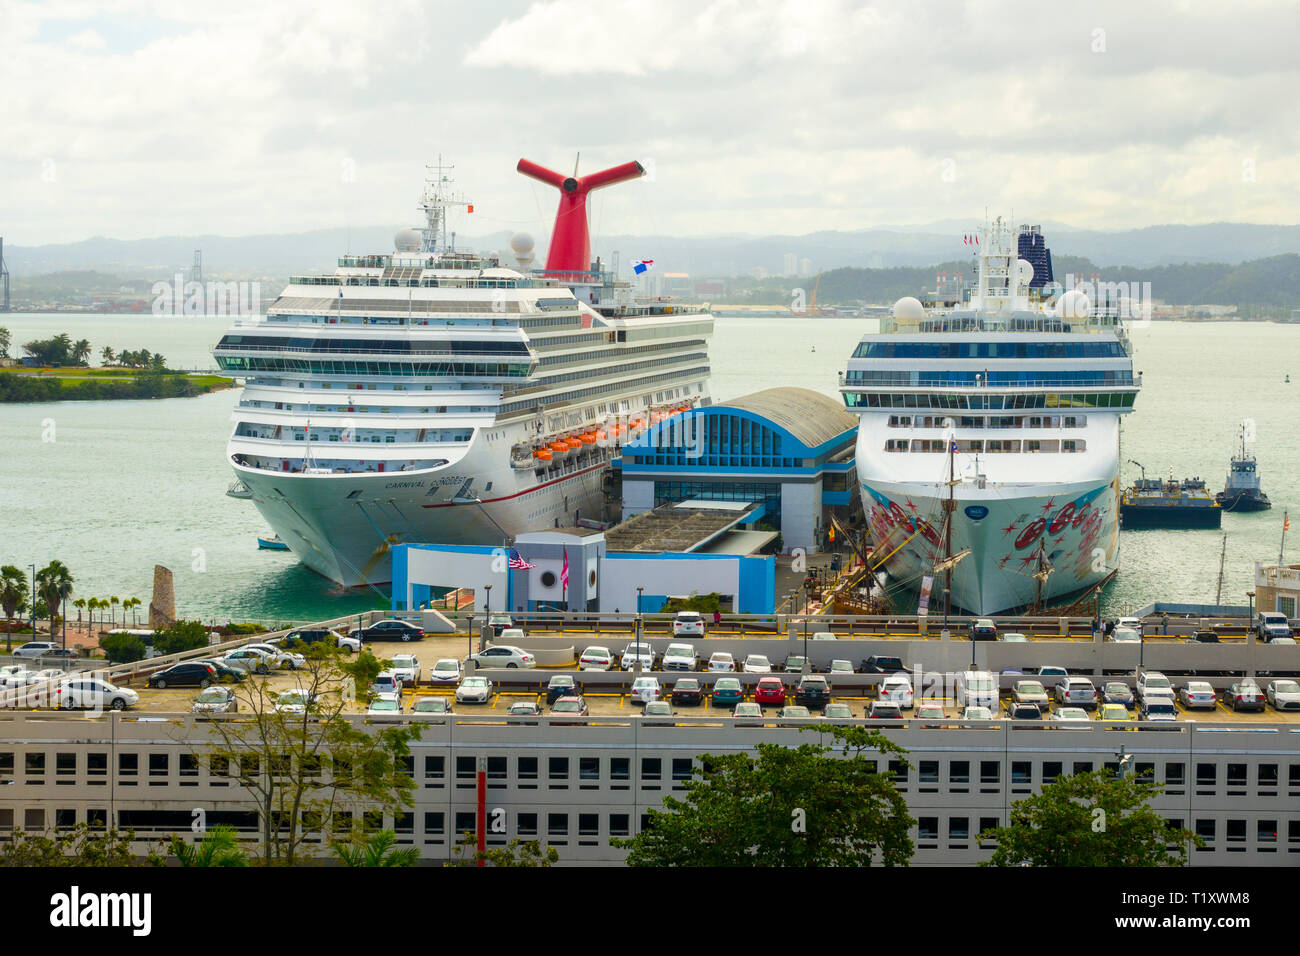 Cruise ships dock at San Juan, Puerto Rico s capital and largest city, sits on the island's Atlantic coast. Its widest beach fronts the Isla Verde res Stock Photo